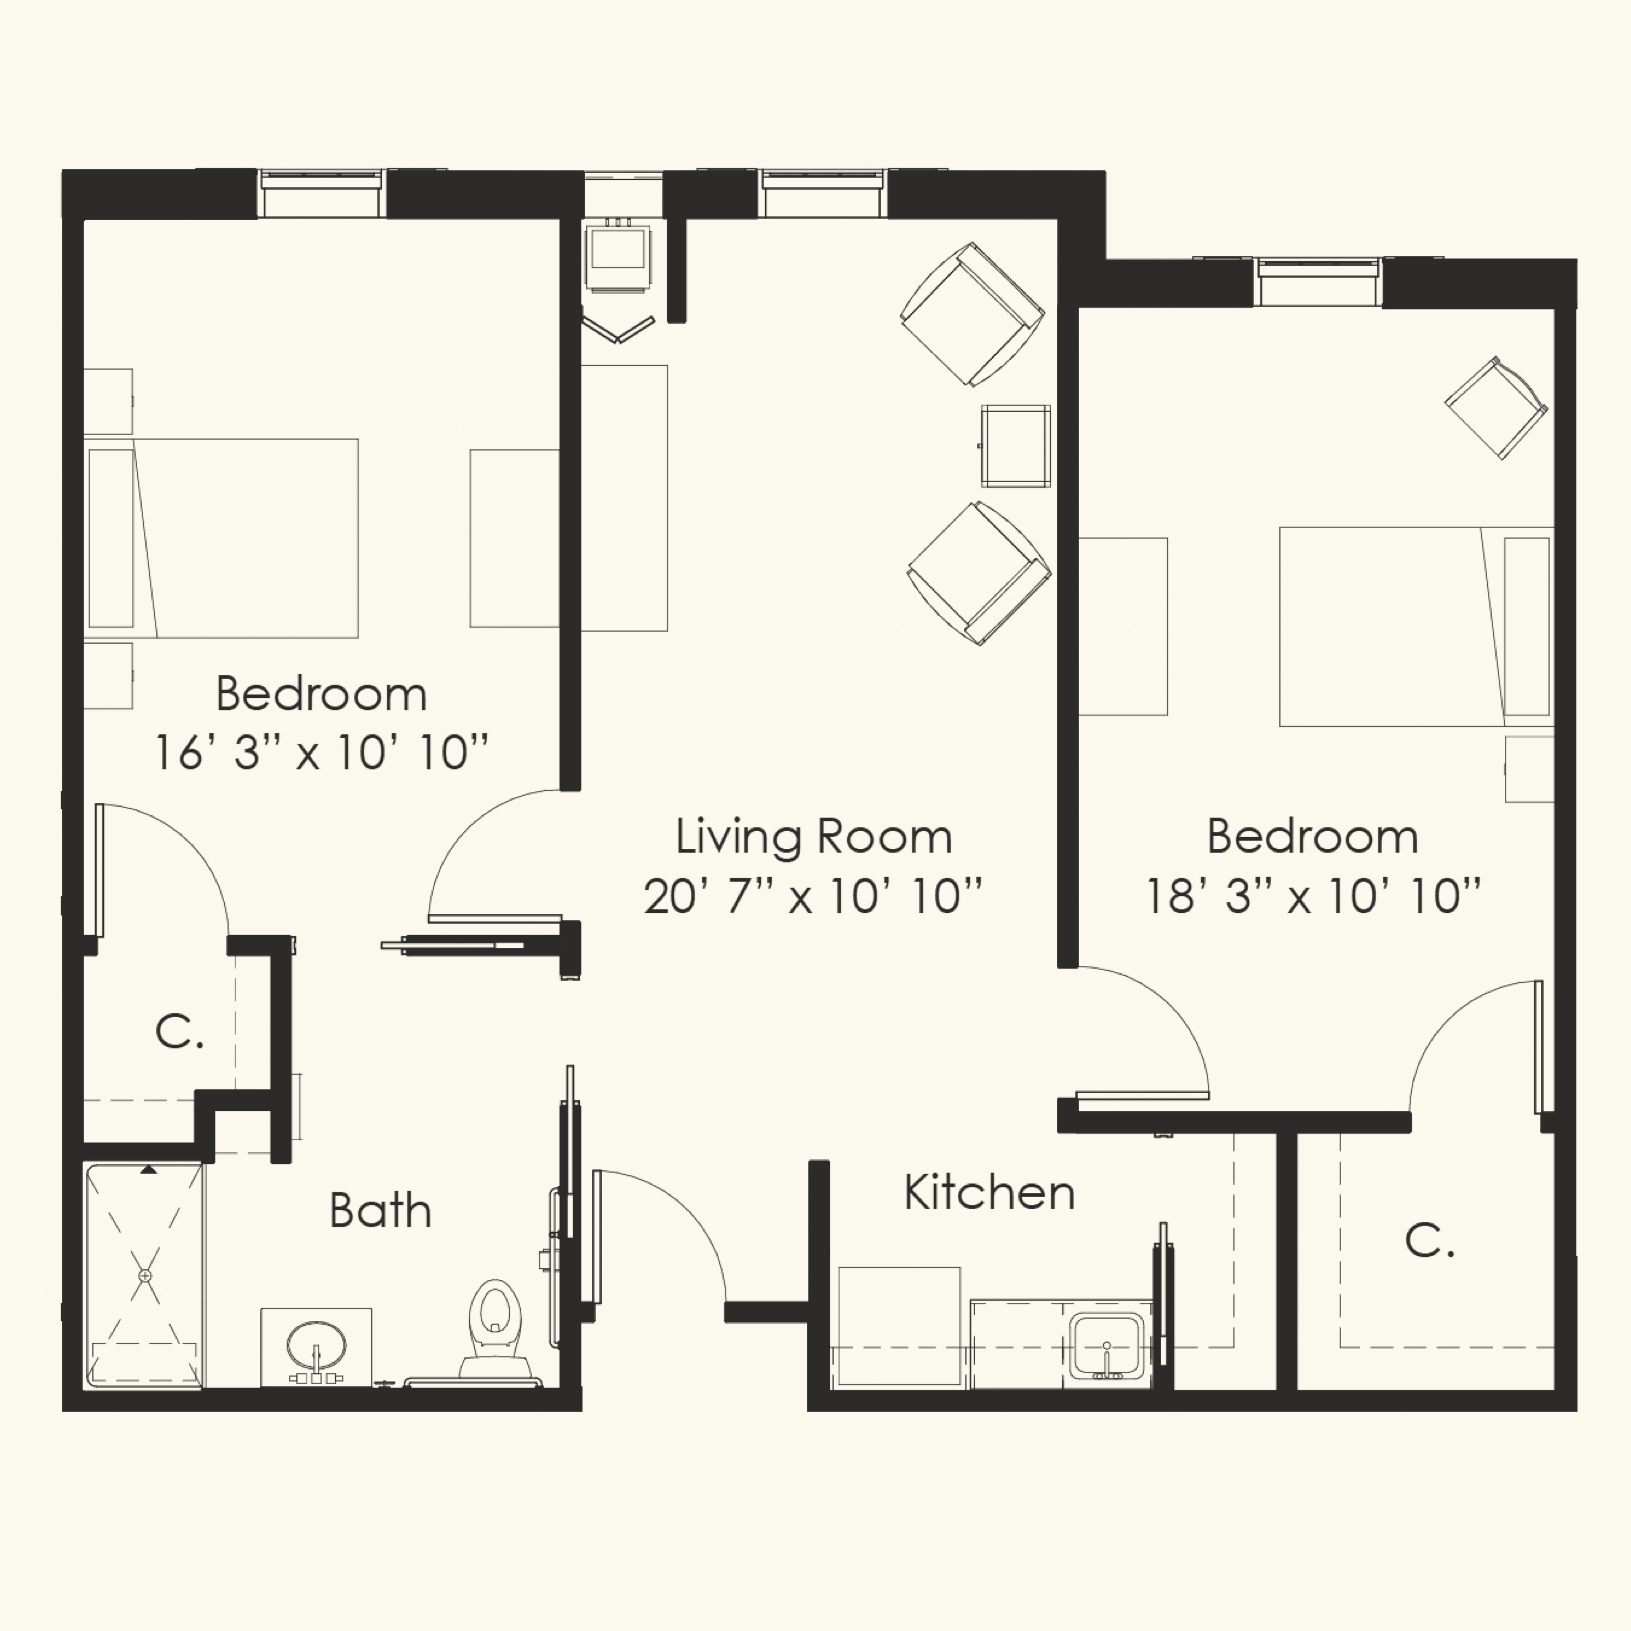 2 bed layout